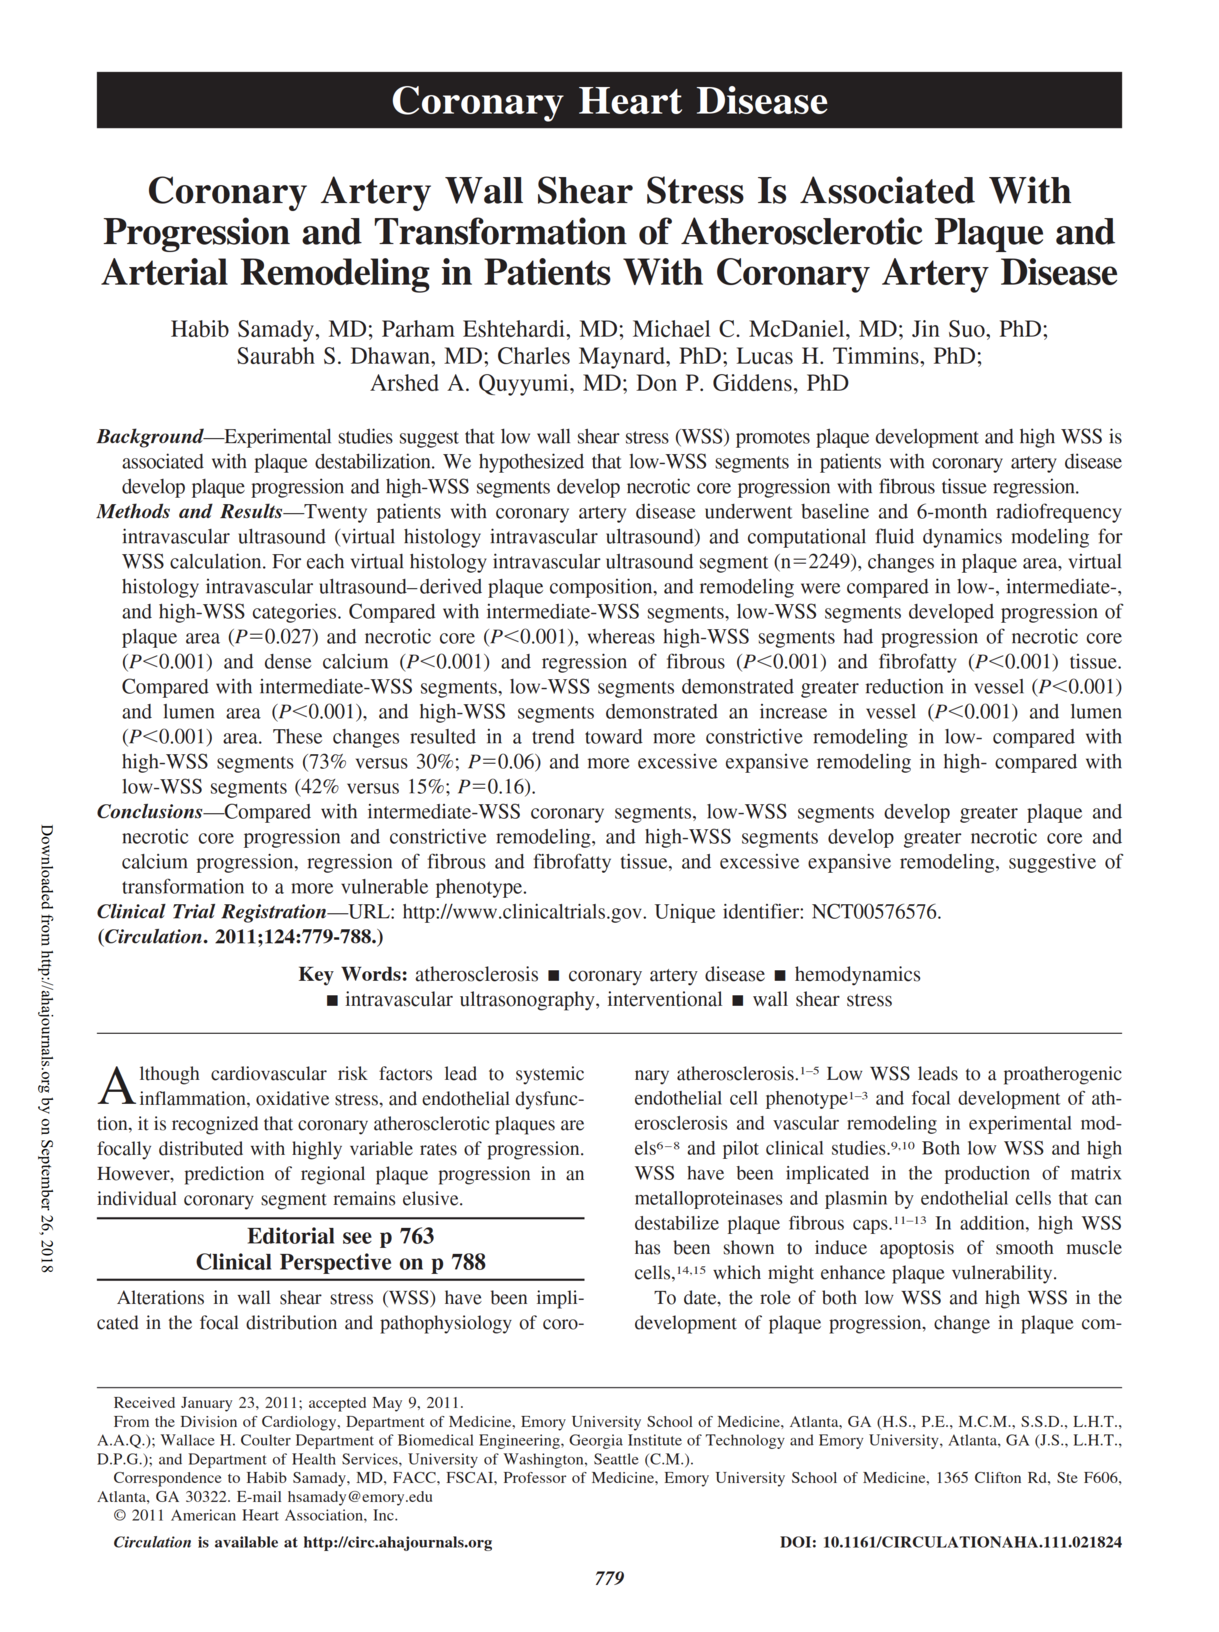 Coronary artery wall shear stress is associated with progression and transformation of atherosclerotic plaque and arterial remodeling in patients with coronary artery disease